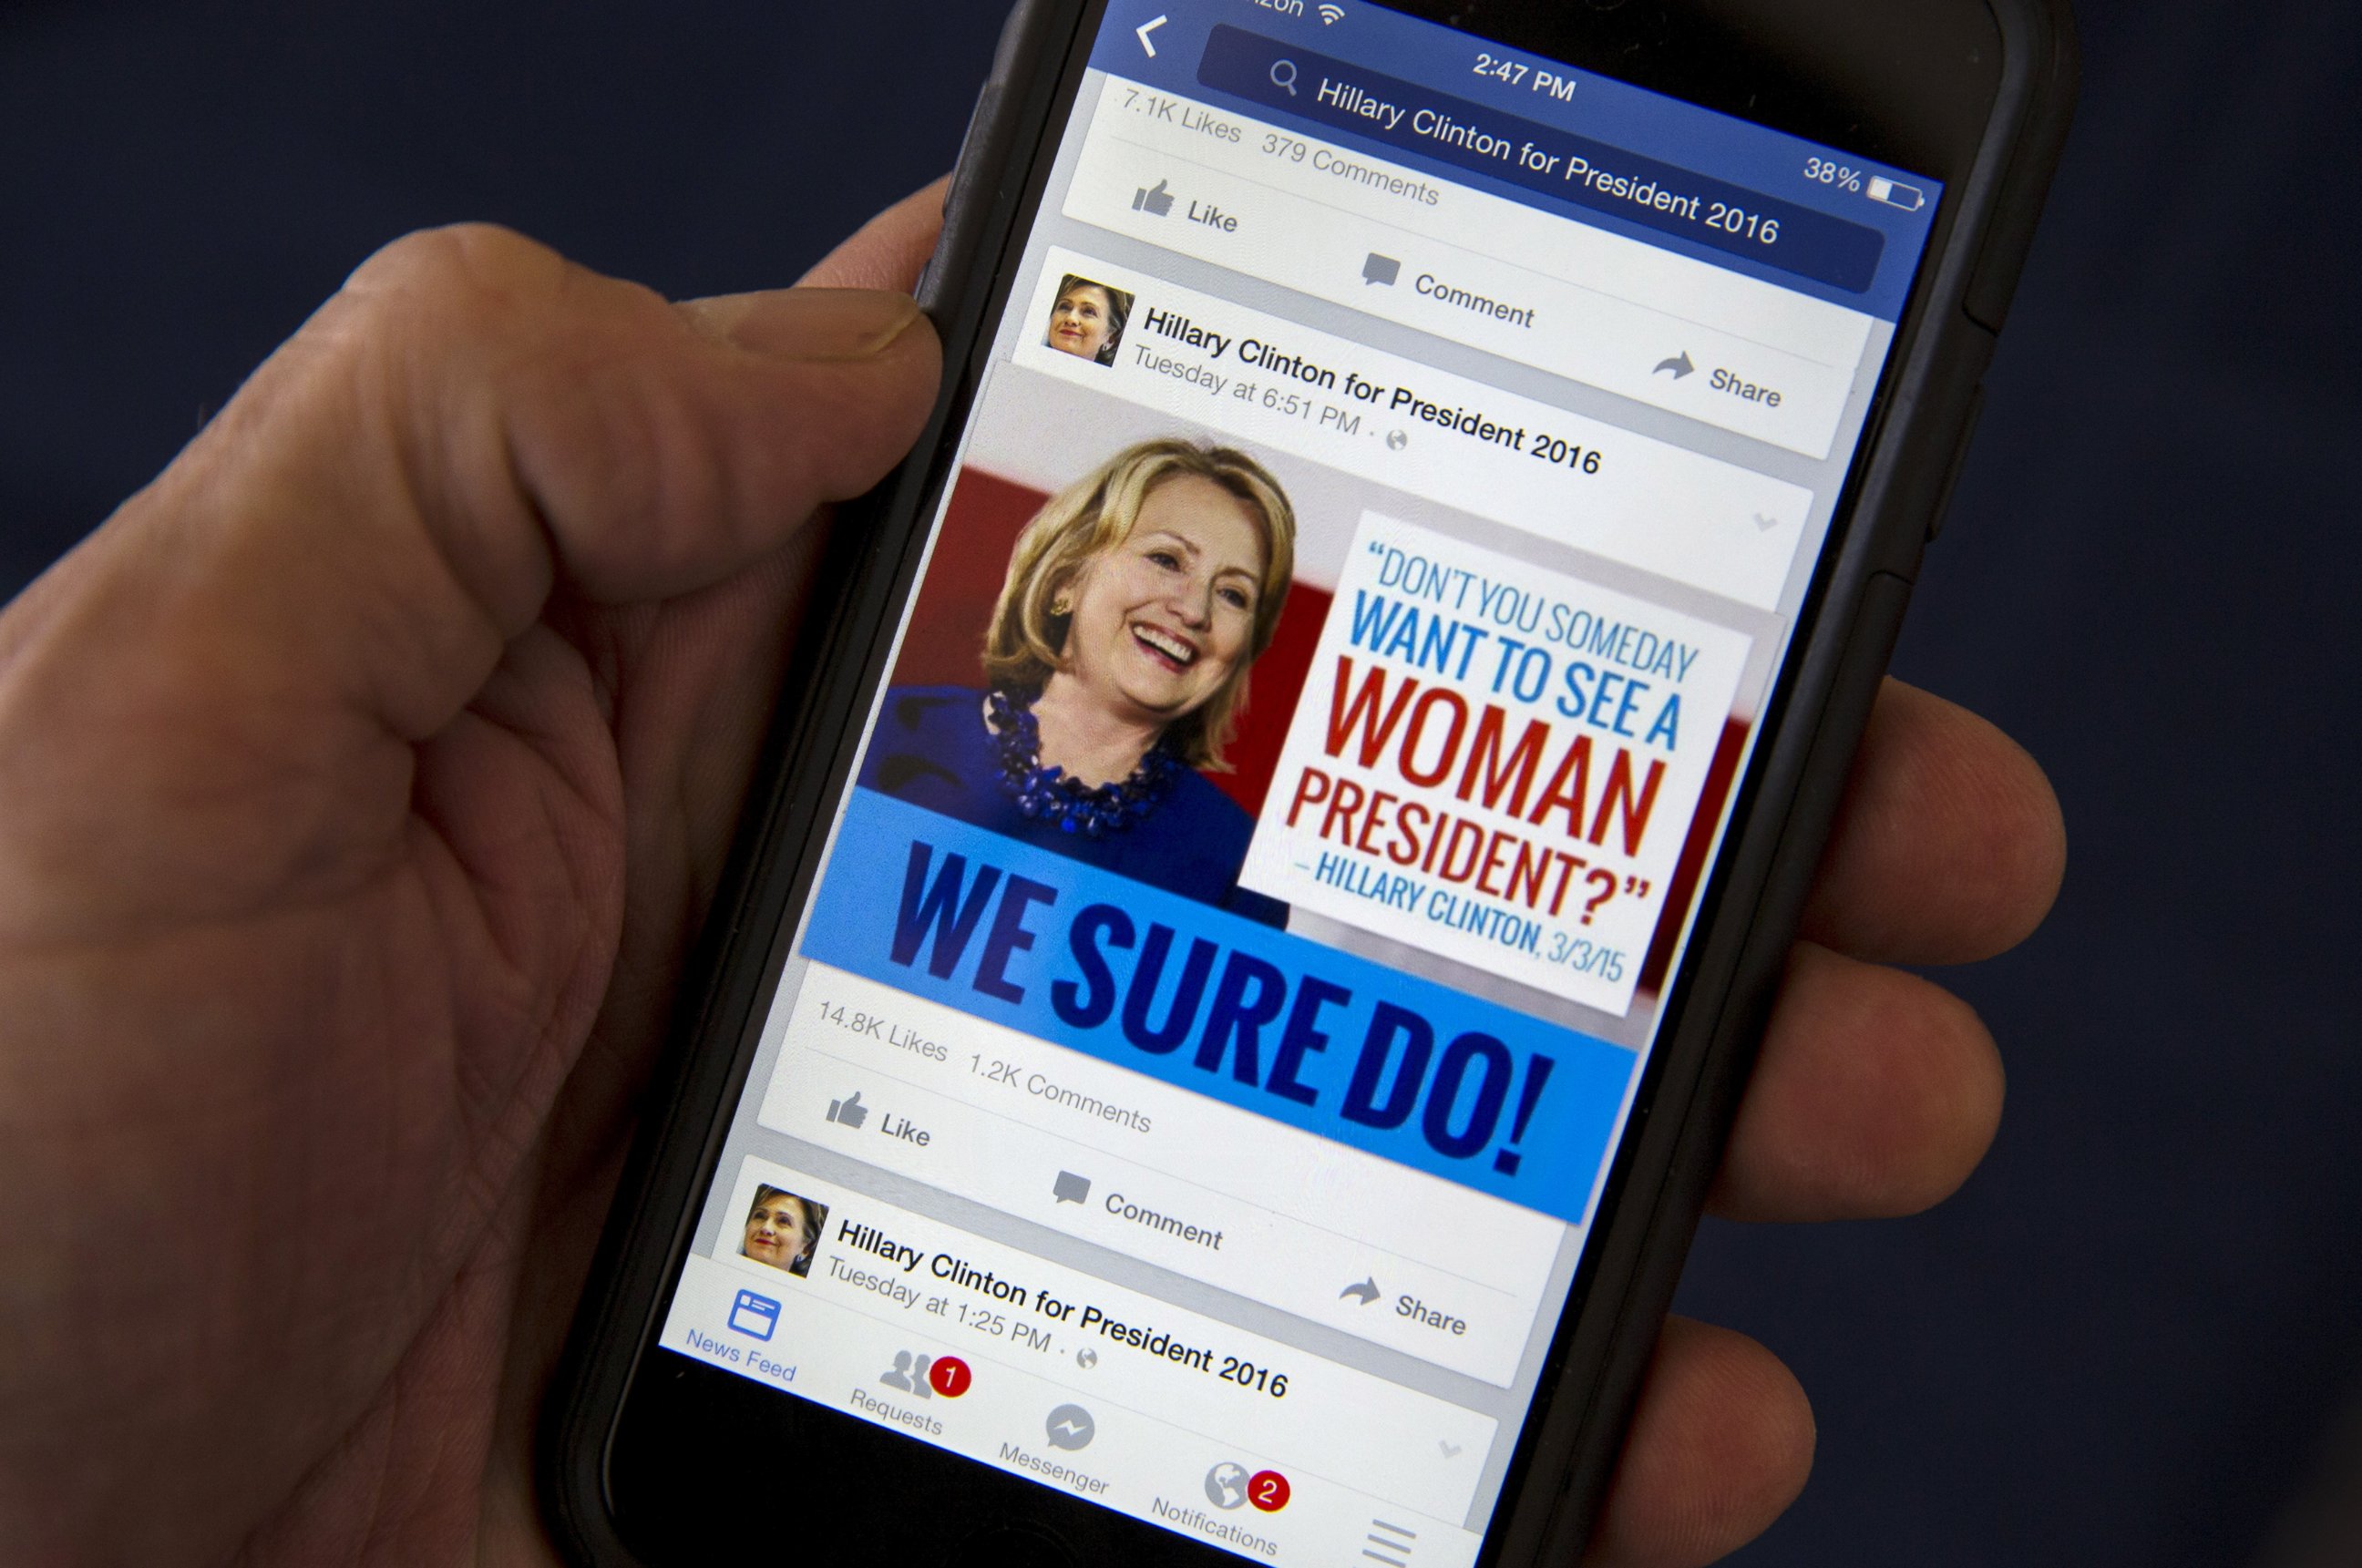 PHOTO: A mobile phone shows a Facebook page promoting Hillary Clinton for president in 2016, photographed on April 13, 2015.